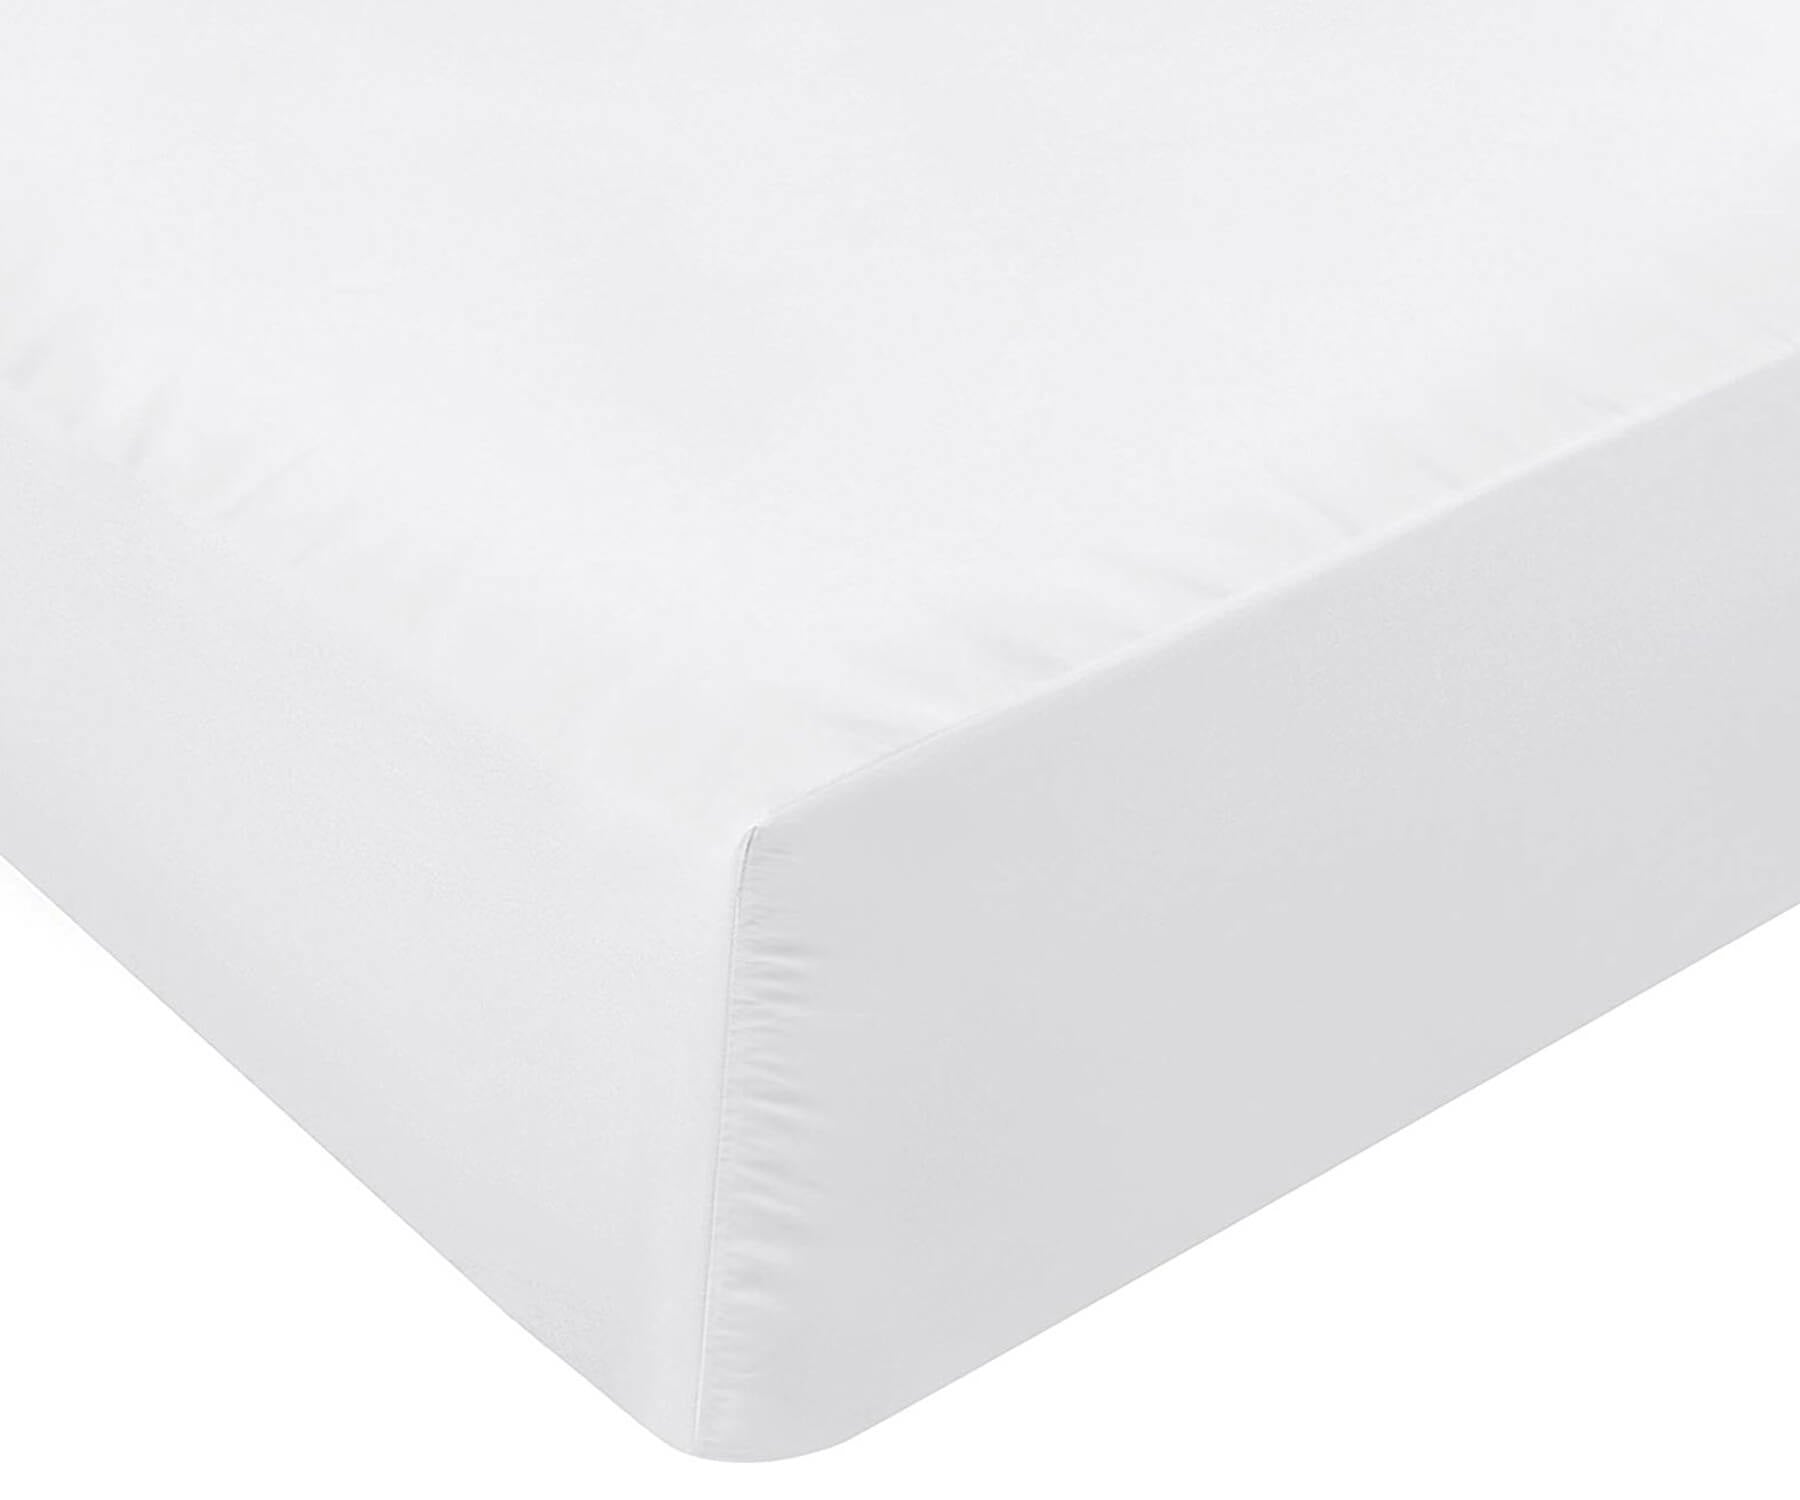 Mattress adorned with a white cotton fitted sheet